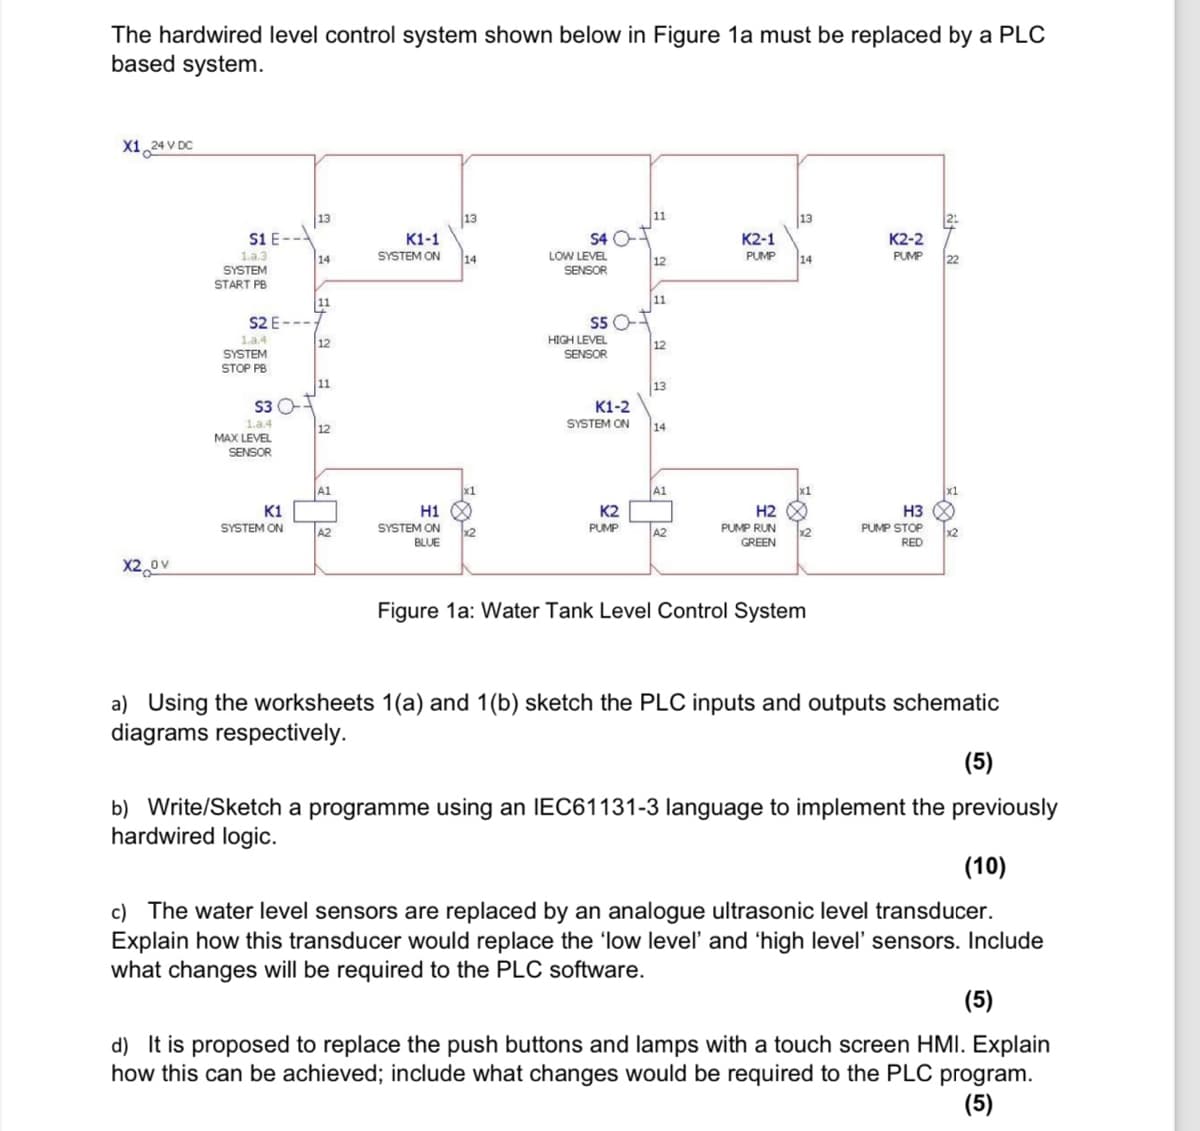 The hardwired level control system shown below in Figure 1a must be replaced by a PLC
based system.
X124 V DC
X2ºv
13
13
11
13
S1 E---
K1-1
S4
K2-1
K2-2
1.a.3
14
SYSTEM ON
14
LOW LEVEL
12
PUMP
SYSTEM
14
PUMP
22
N
SENSOR
START PB
11
11
S2 E---
S5
1.a.4
12
HIGH LEVEL
12
SYSTEM
SENSOR
STOP PB
11
S3
1.a.4
12
13
K1-2
SYSTEM ON
14
MAX LEVEL
SENSOR
A1
x1
K1
SYSTEM ON
H1
A2
SYSTEM ON
BLUE
A1
x1
K2
H2
H3
PUMP
A2
PUMP RUN
x2
GREEN
PUMP STOP
RED
Figure 1a: Water Tank Level Control System
a) Using the worksheets 1(a) and 1(b) sketch the PLC inputs and outputs schematic
diagrams respectively.
(5)
b) Write/Sketch a programme using an IEC61131-3 language to implement the previously
hardwired logic.
(10)
c) The water level sensors are replaced by an analogue ultrasonic level transducer.
Explain how this transducer would replace the 'low level' and 'high level' sensors. Include
what changes will be required to the PLC software.
(5)
d) It is proposed to replace the push buttons and lamps with a touch screen HMI. Explain
how this can be achieved; include what changes would be required to the PLC program.
(5)